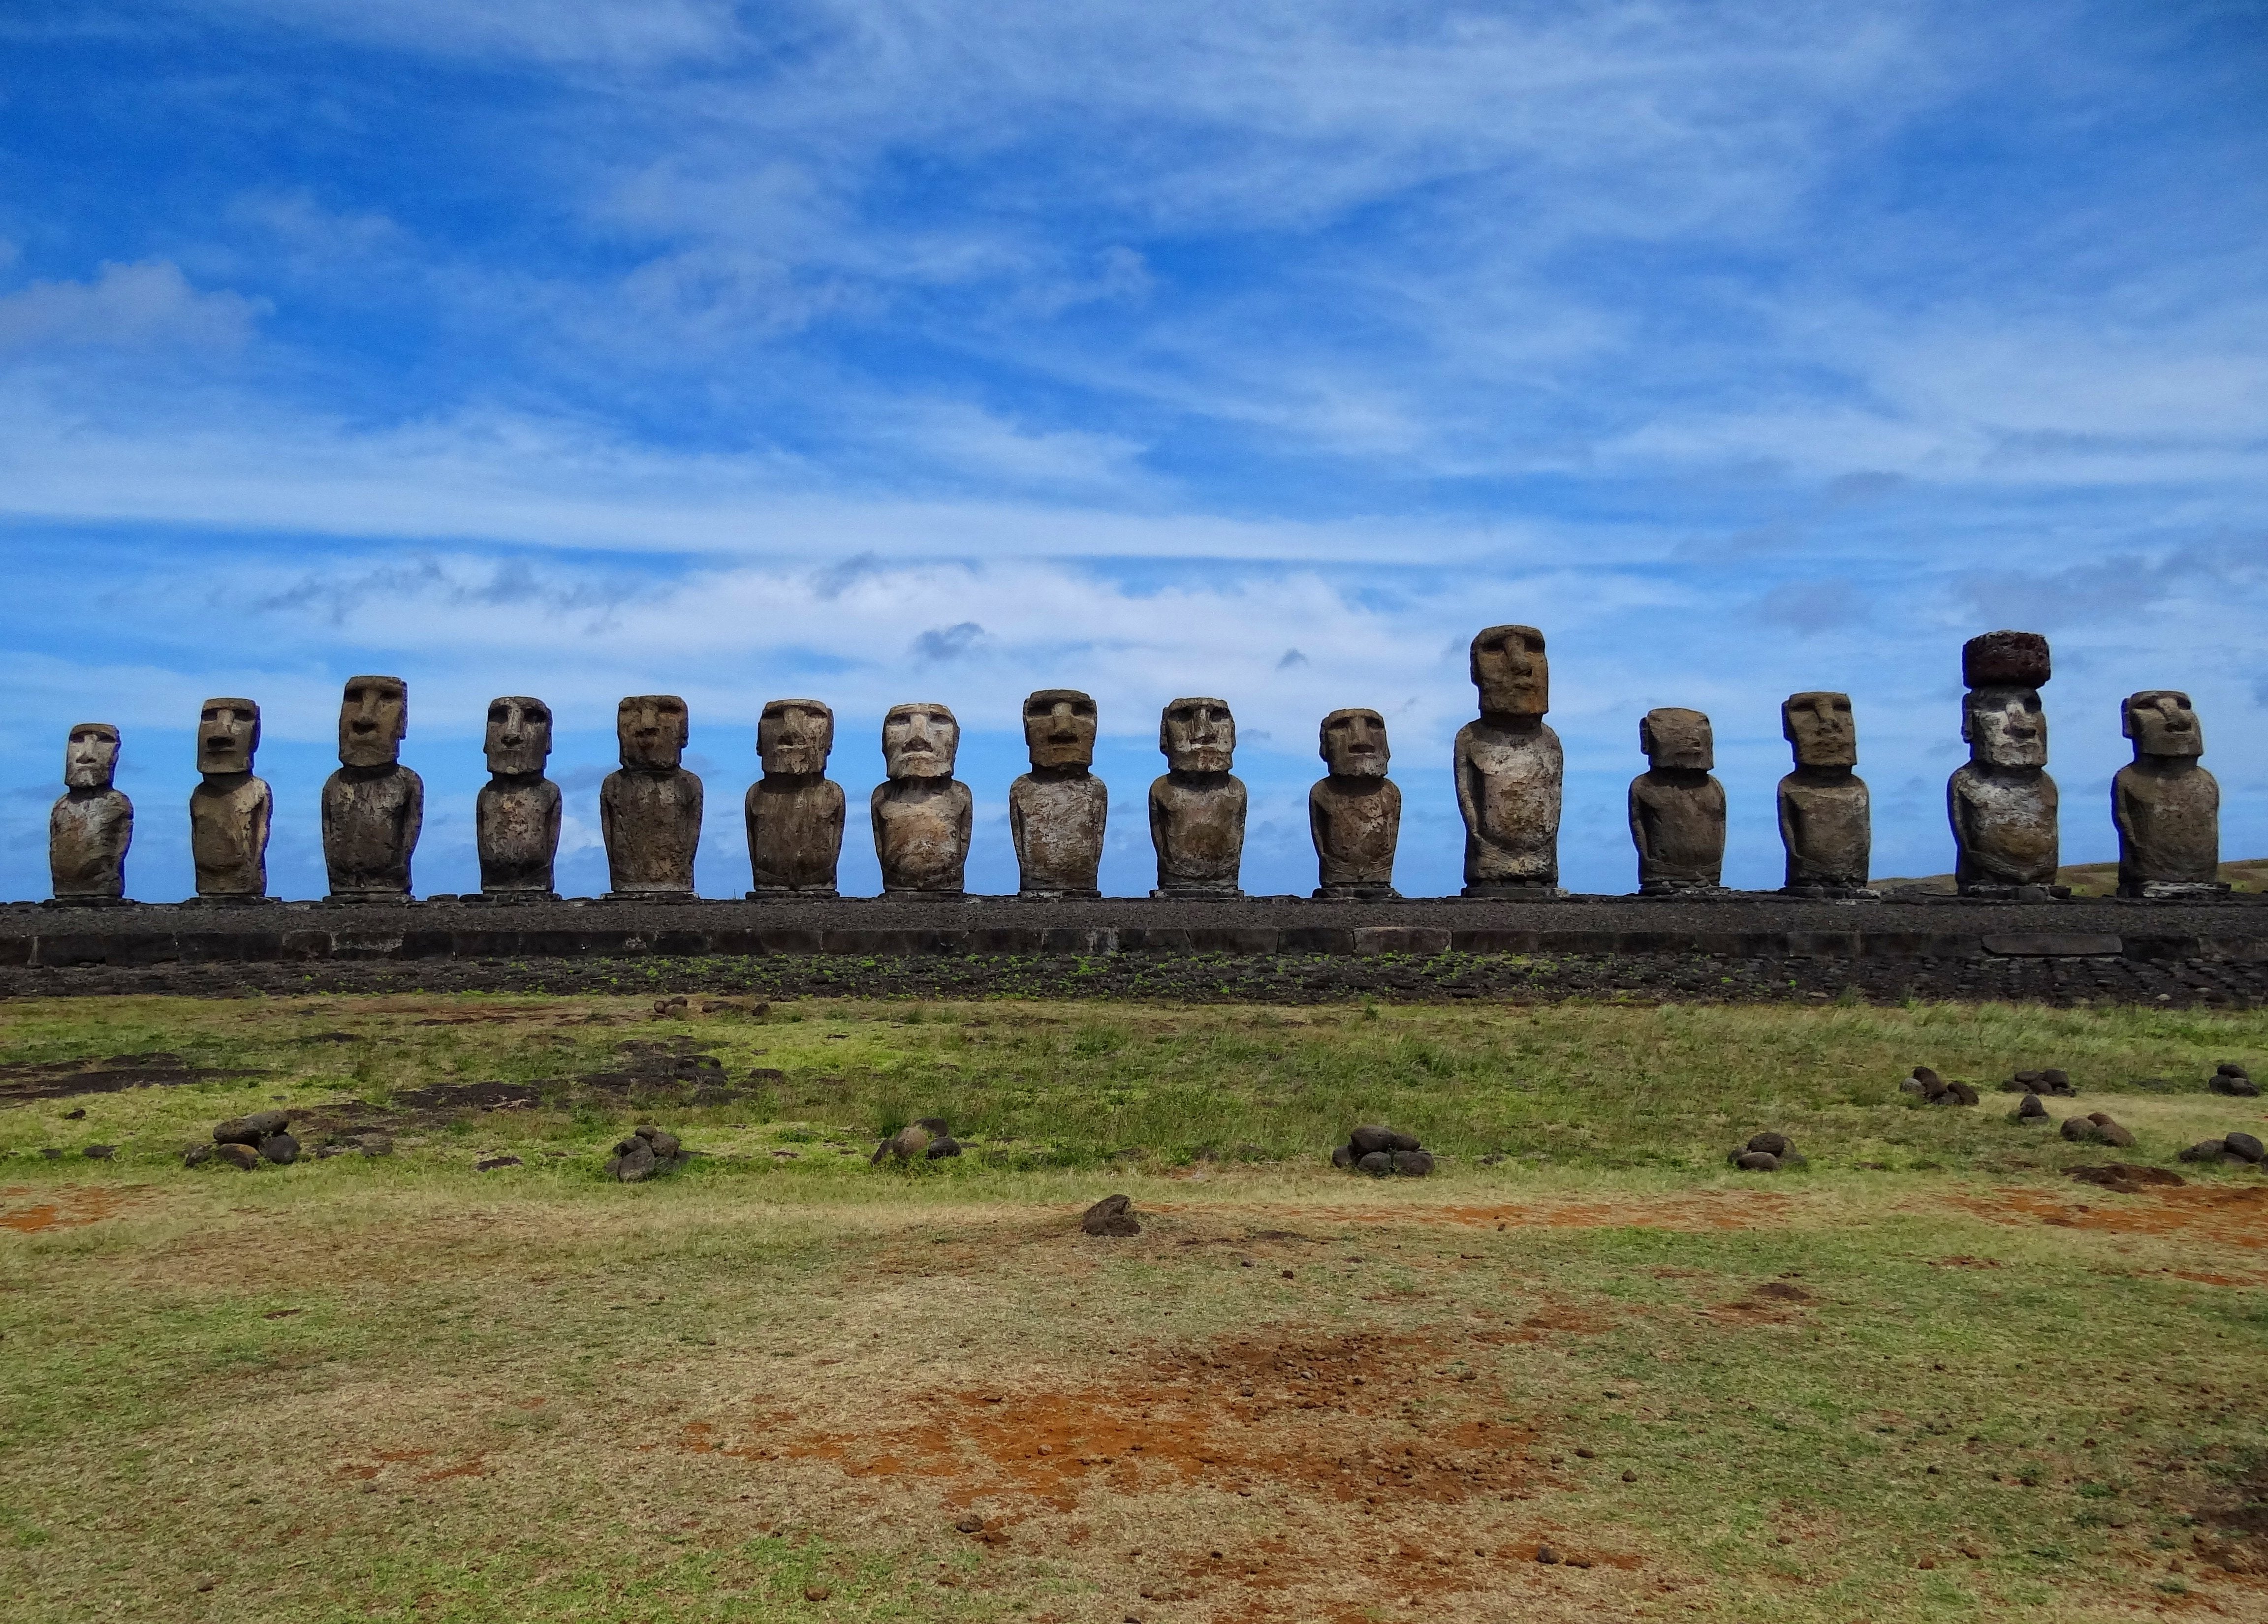 For hundreds of years, the sculpting of giant ancestor stone statues was central to Easter Island’s civilisation. The largest statue in this photograph is 9 metres tall and weighs 86 tonnes